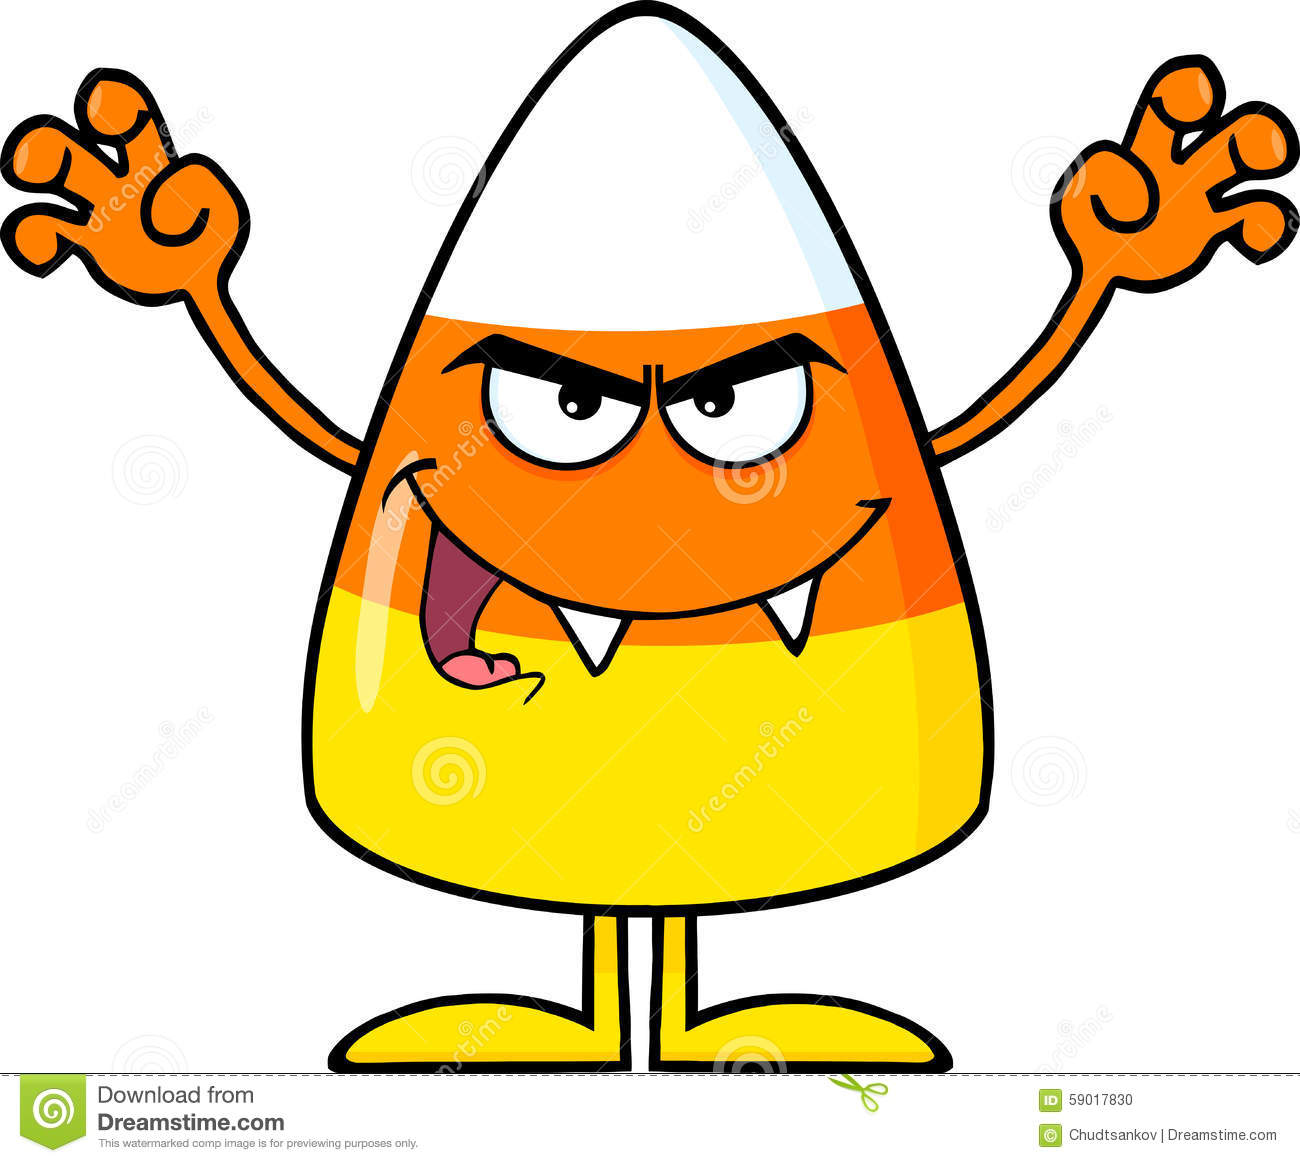 730 Candy Corn free clipart.